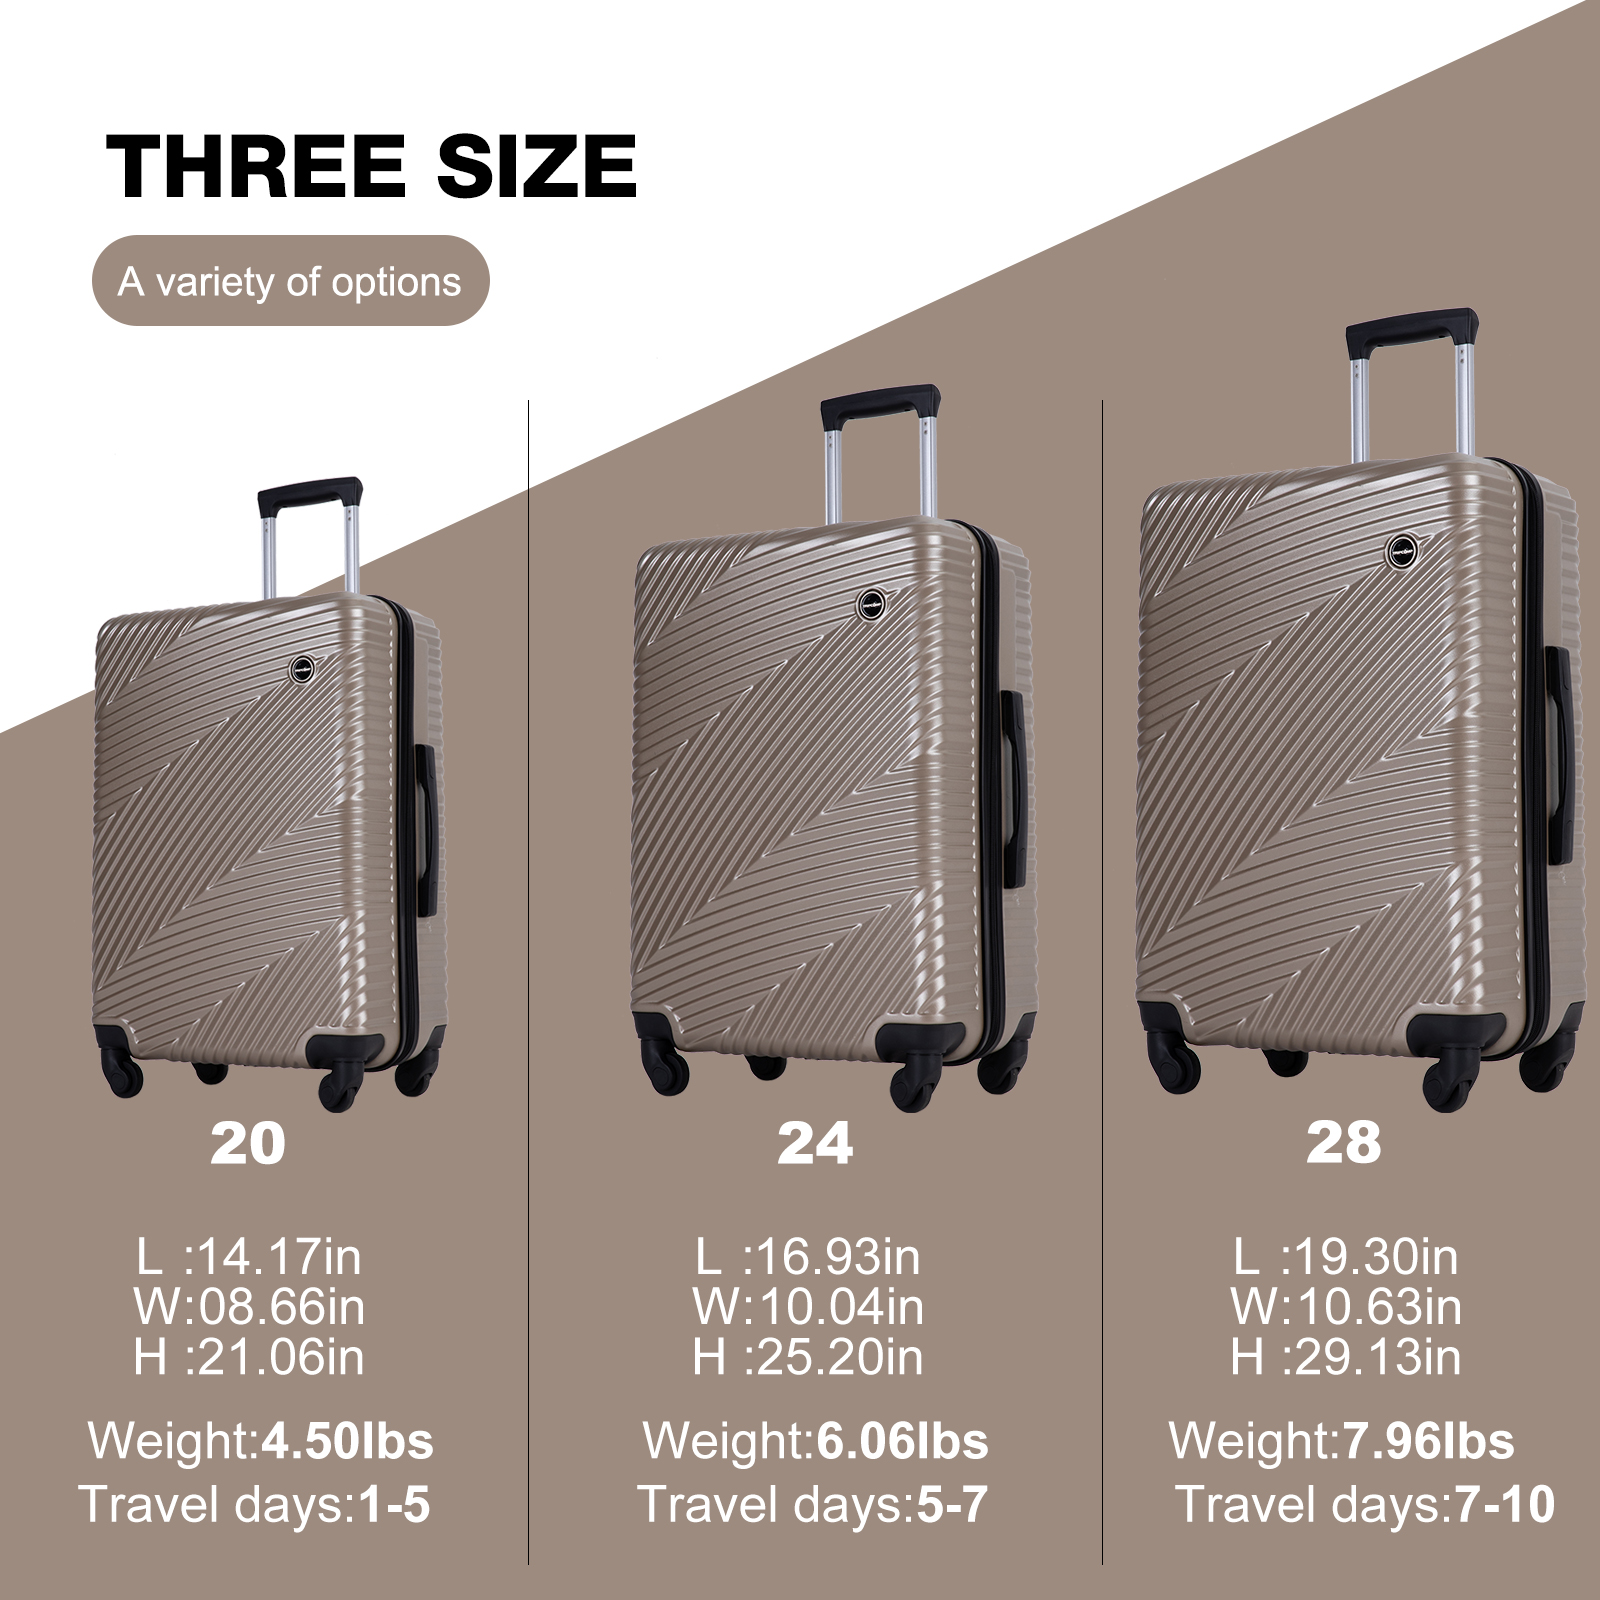 Tripcomp Luggage 3 Piece Set,Suitcase Set with Spinner Wheels Hardside Lightweight Luggage Set 20in24in28in.(Golden) - image 5 of 8